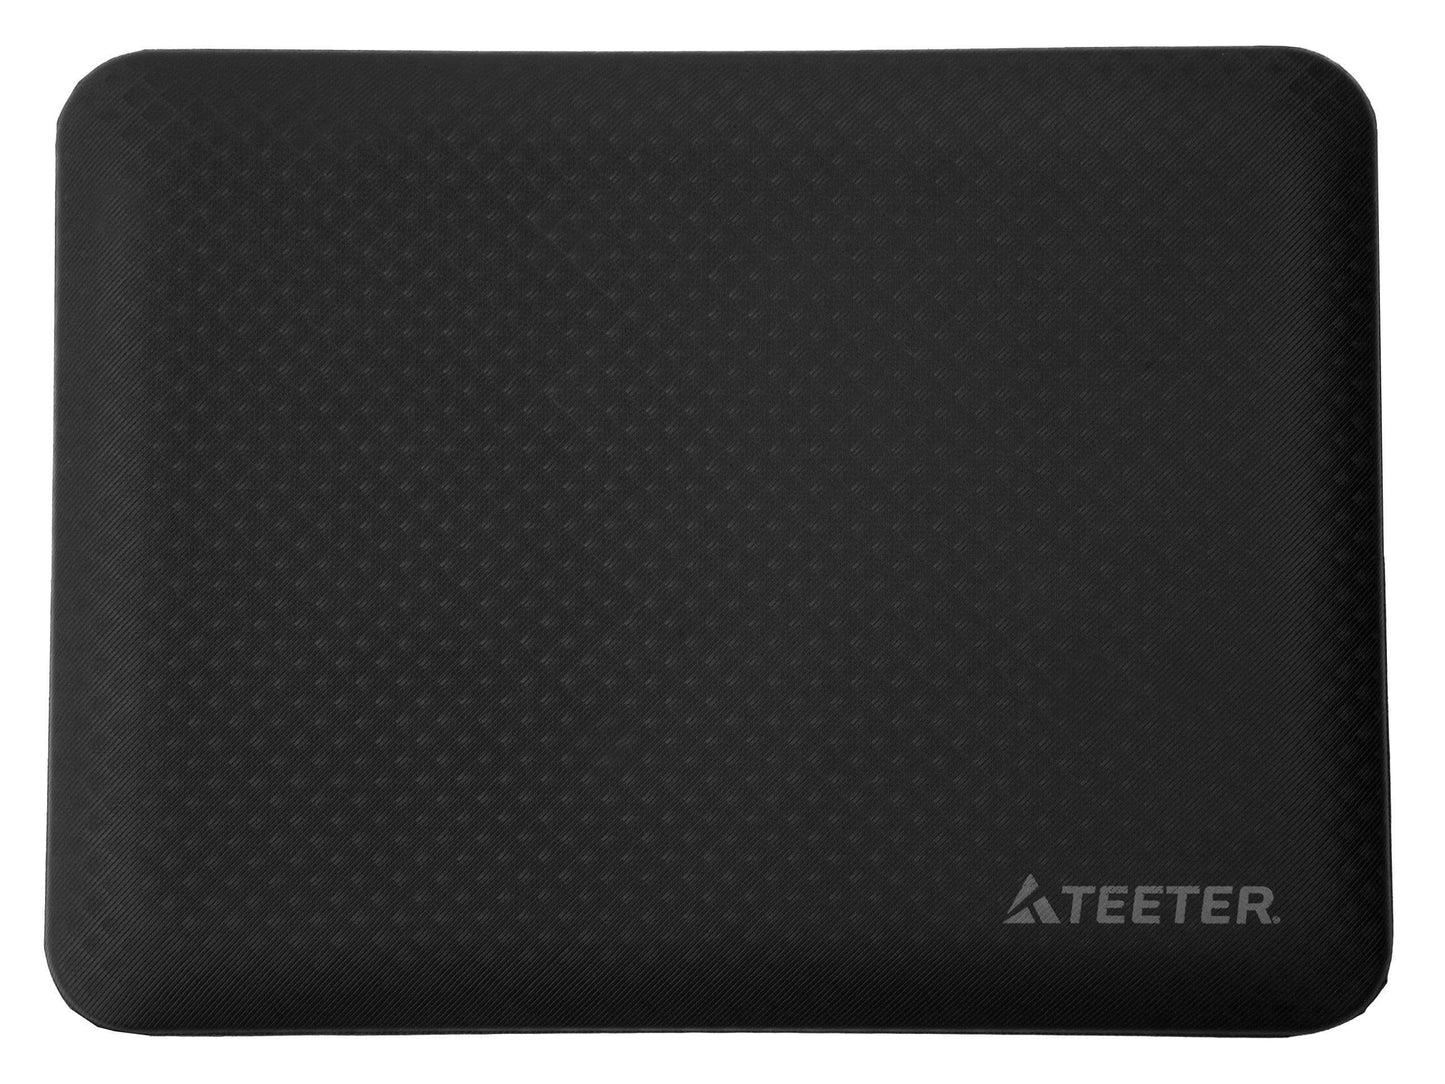 Shop for teeter 3 4 inch anti fatigue standing desk comfort mat back pain relief mat for work or in the kitchen durable compact 19 5 x 15 inches